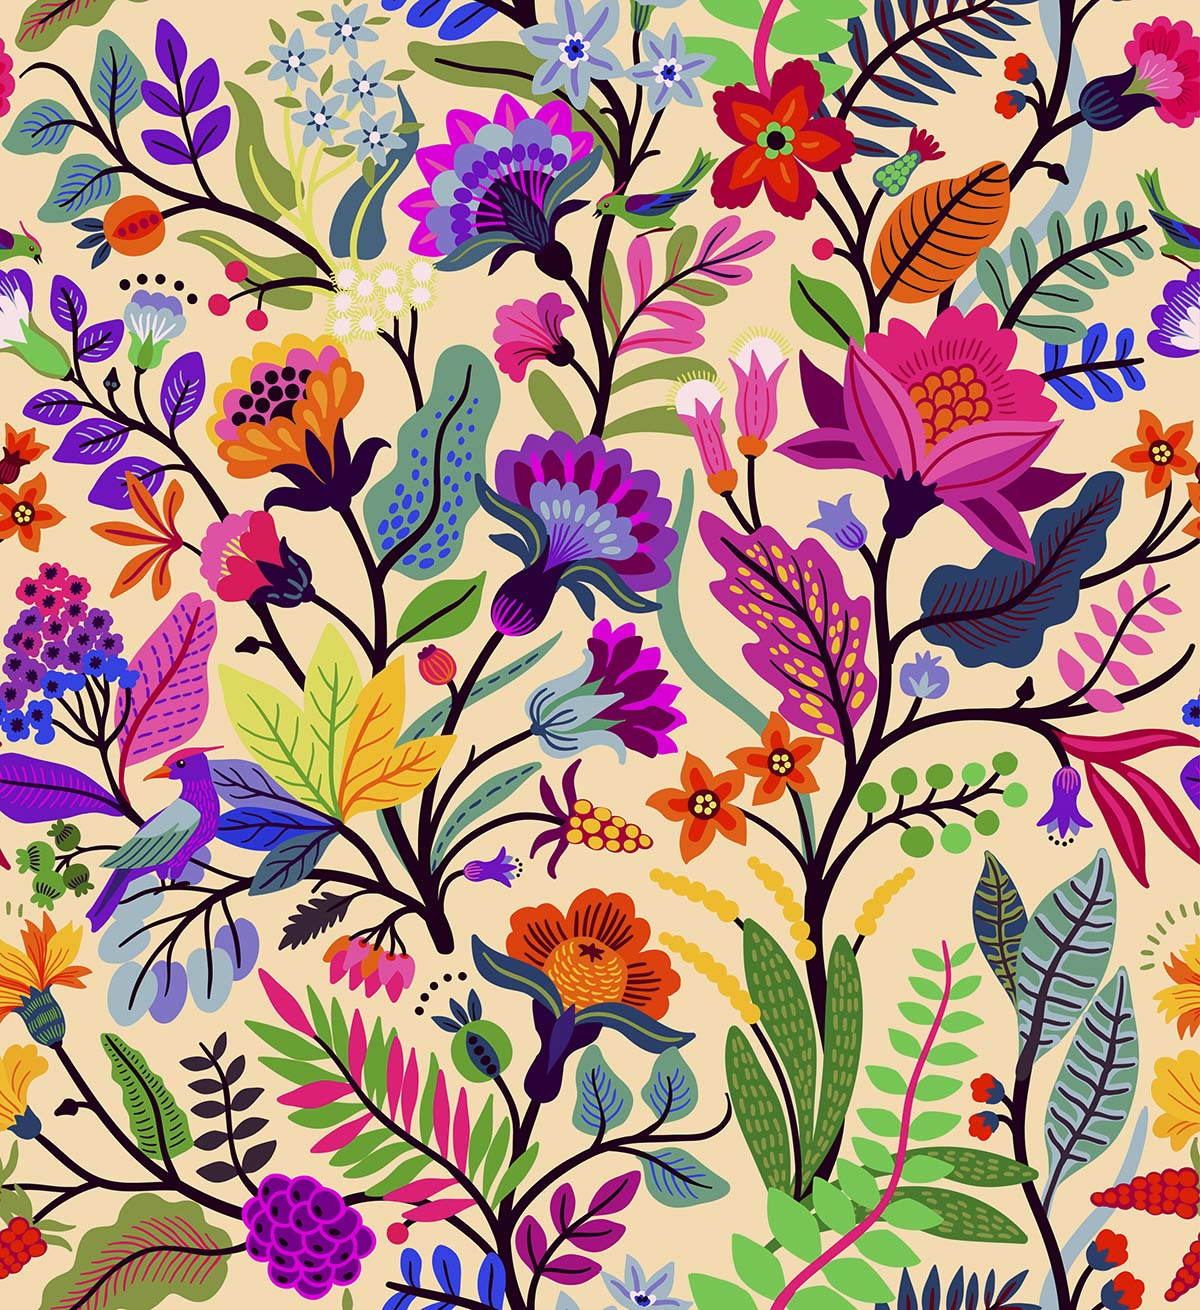 A colorful floral pattern on a beige background